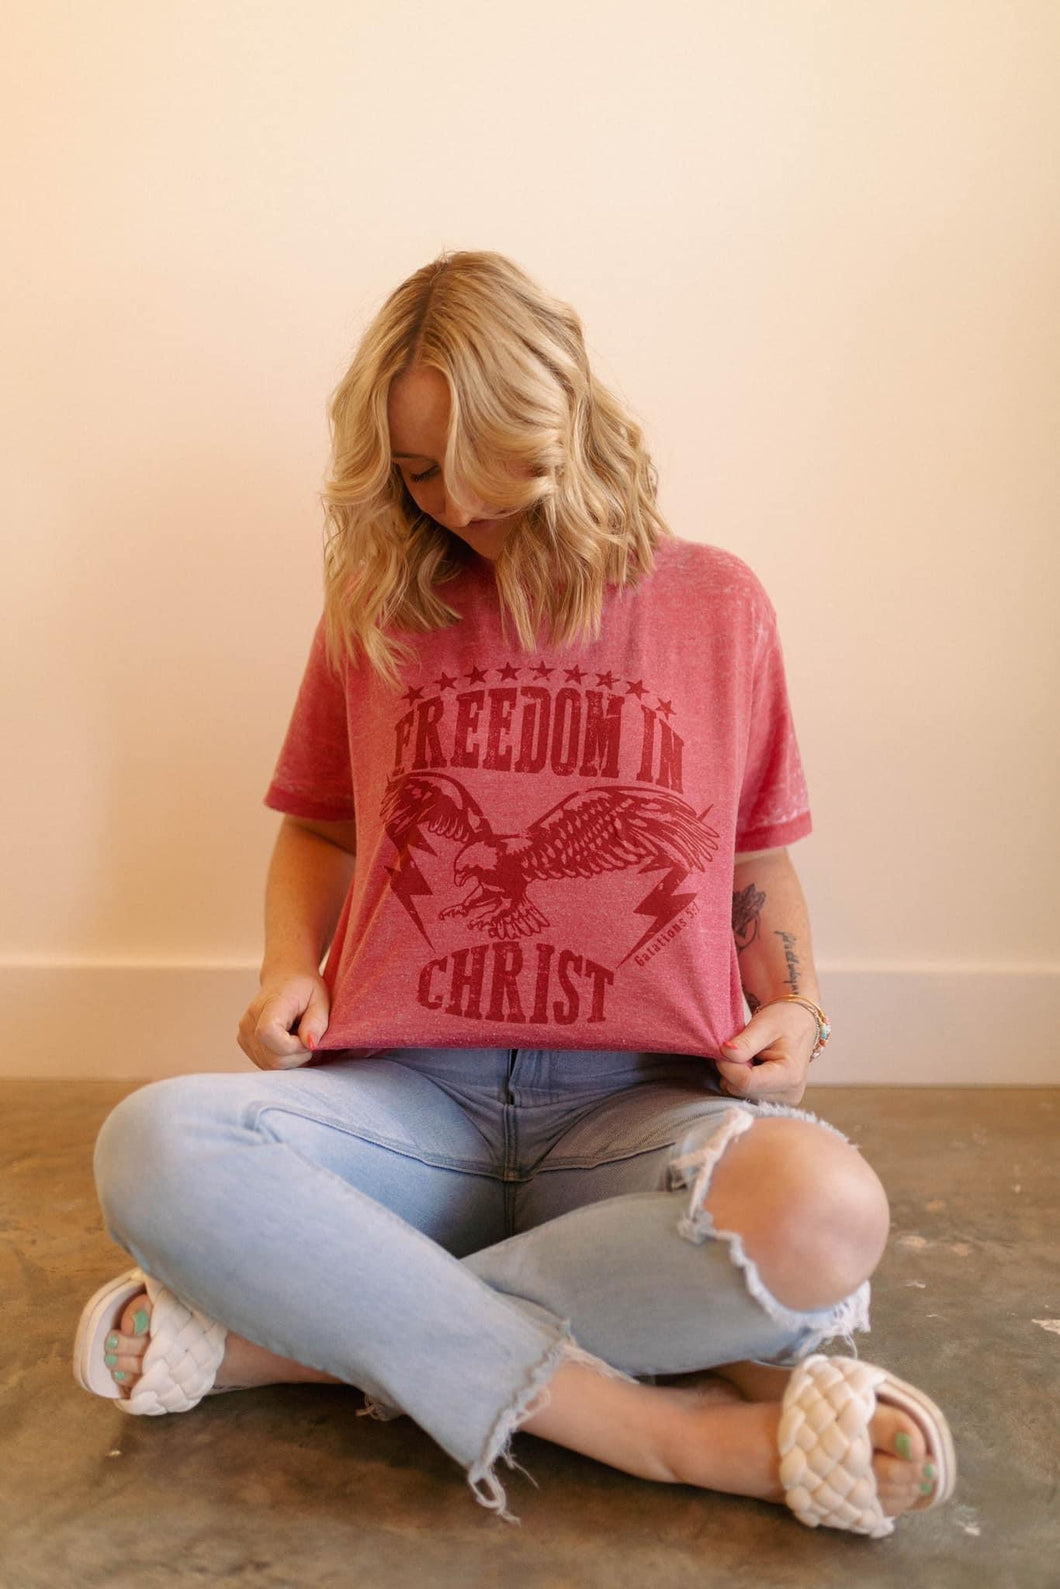 Freedom in Christ tee